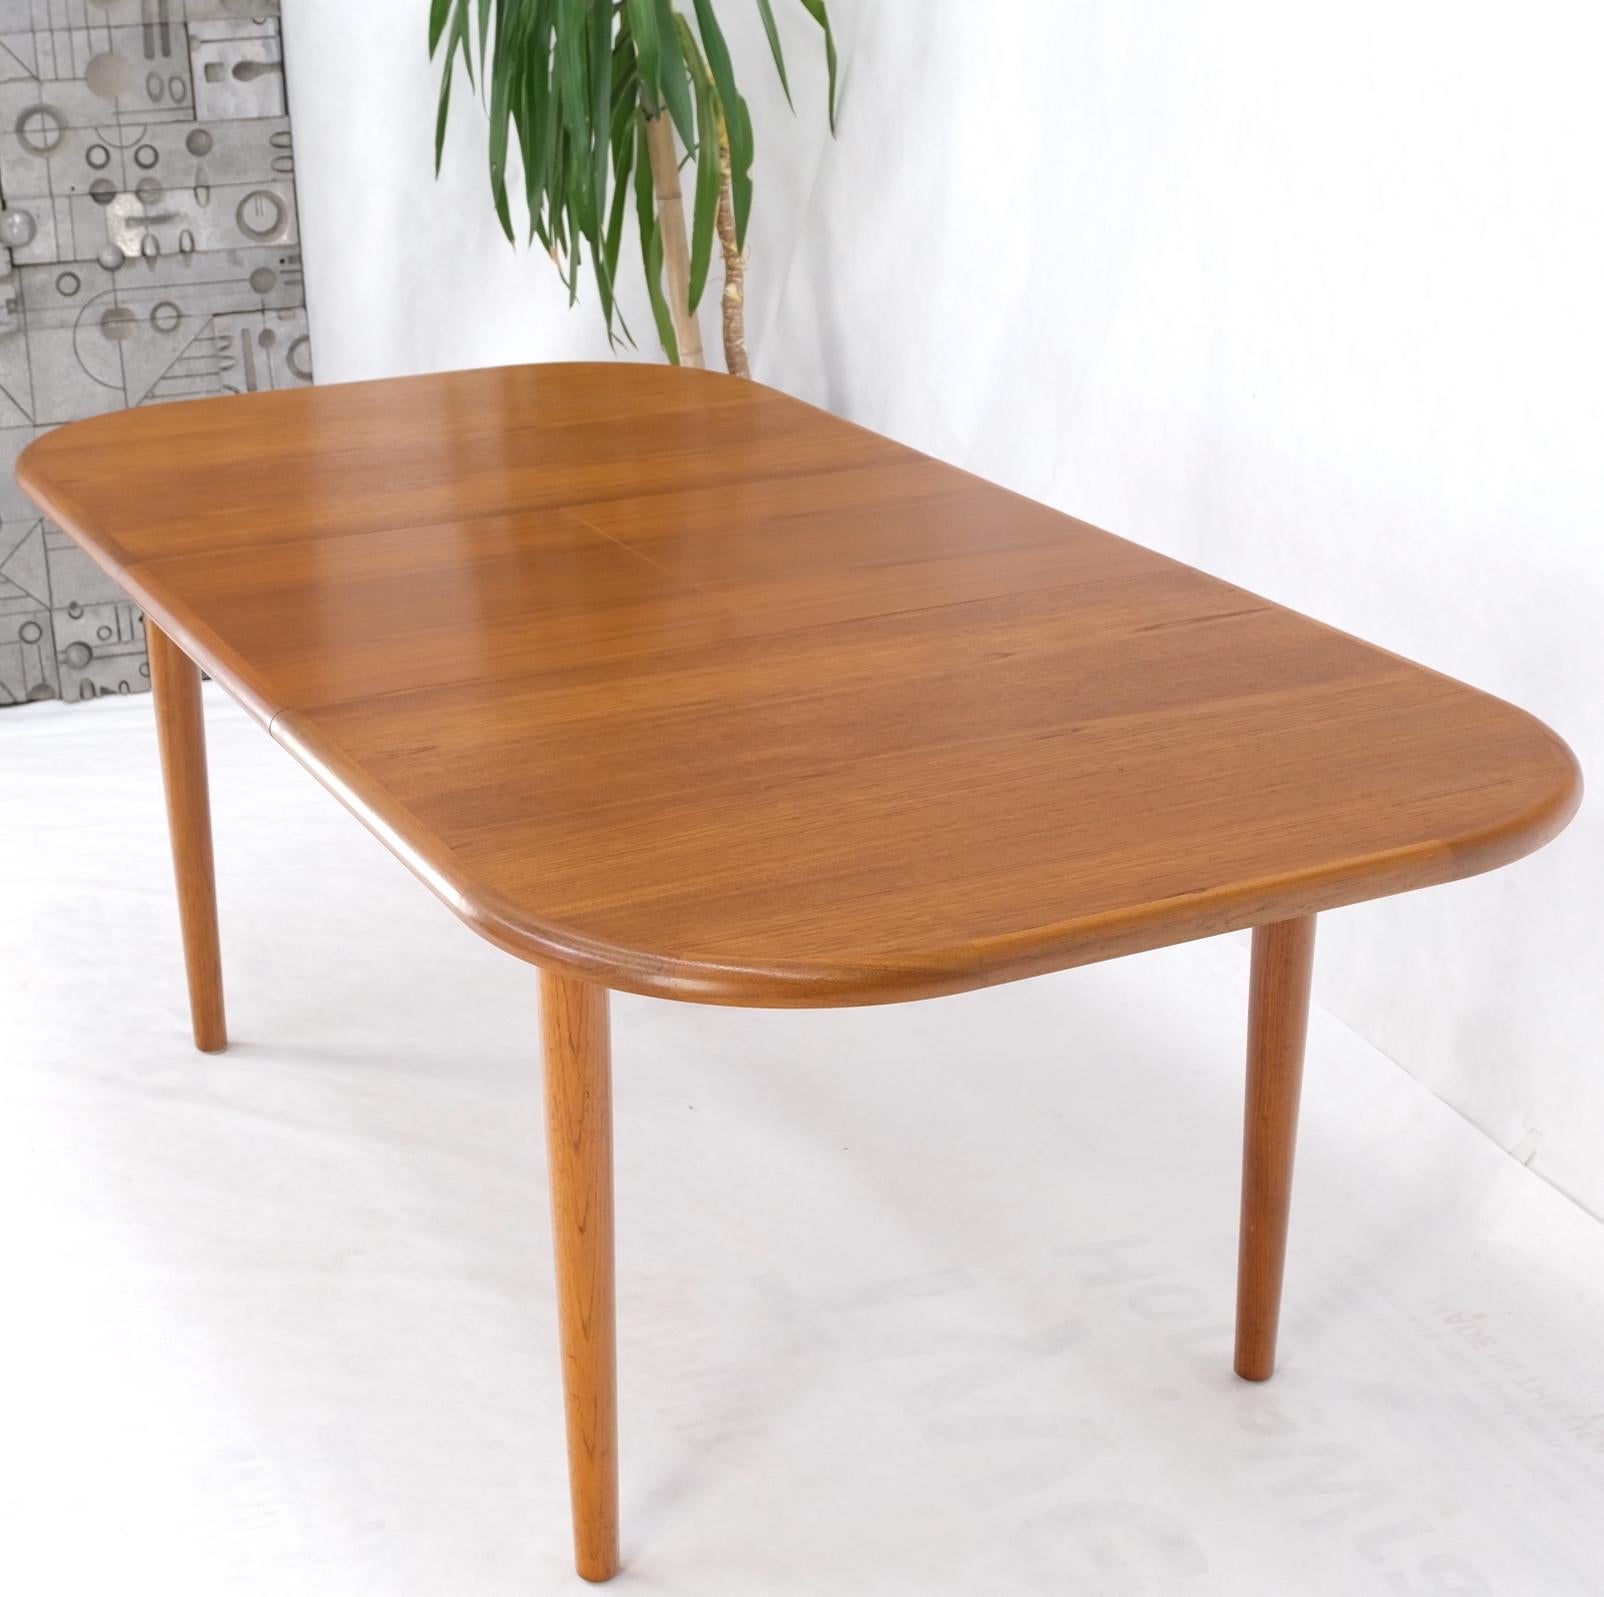 dining table rounded corners